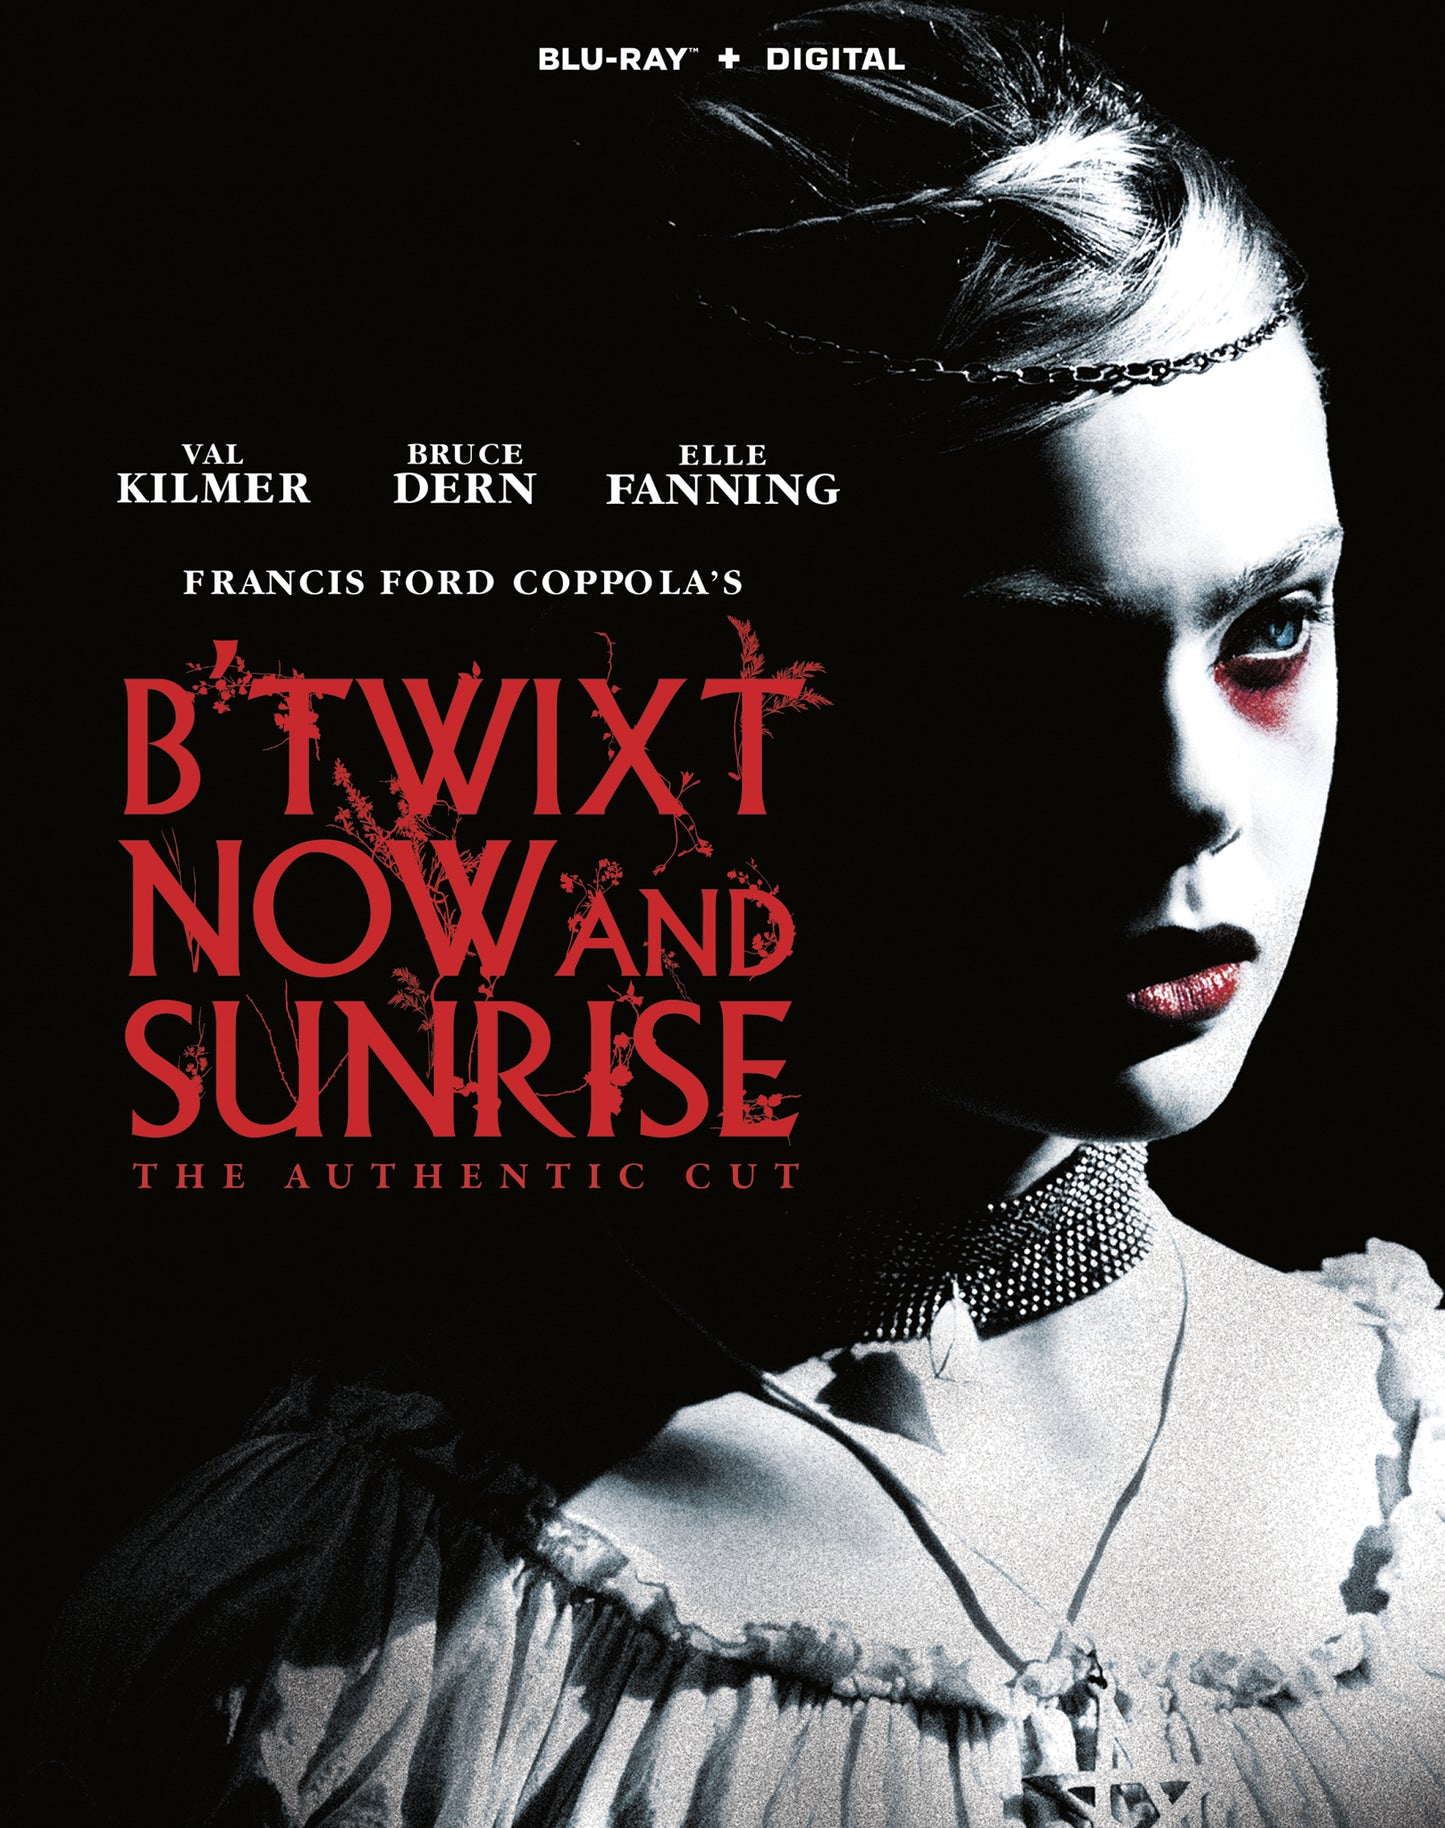 B'twixt Now and Sunrise: The Authentic Cut [Includes Digital Copy] [Blu-ray] cover art